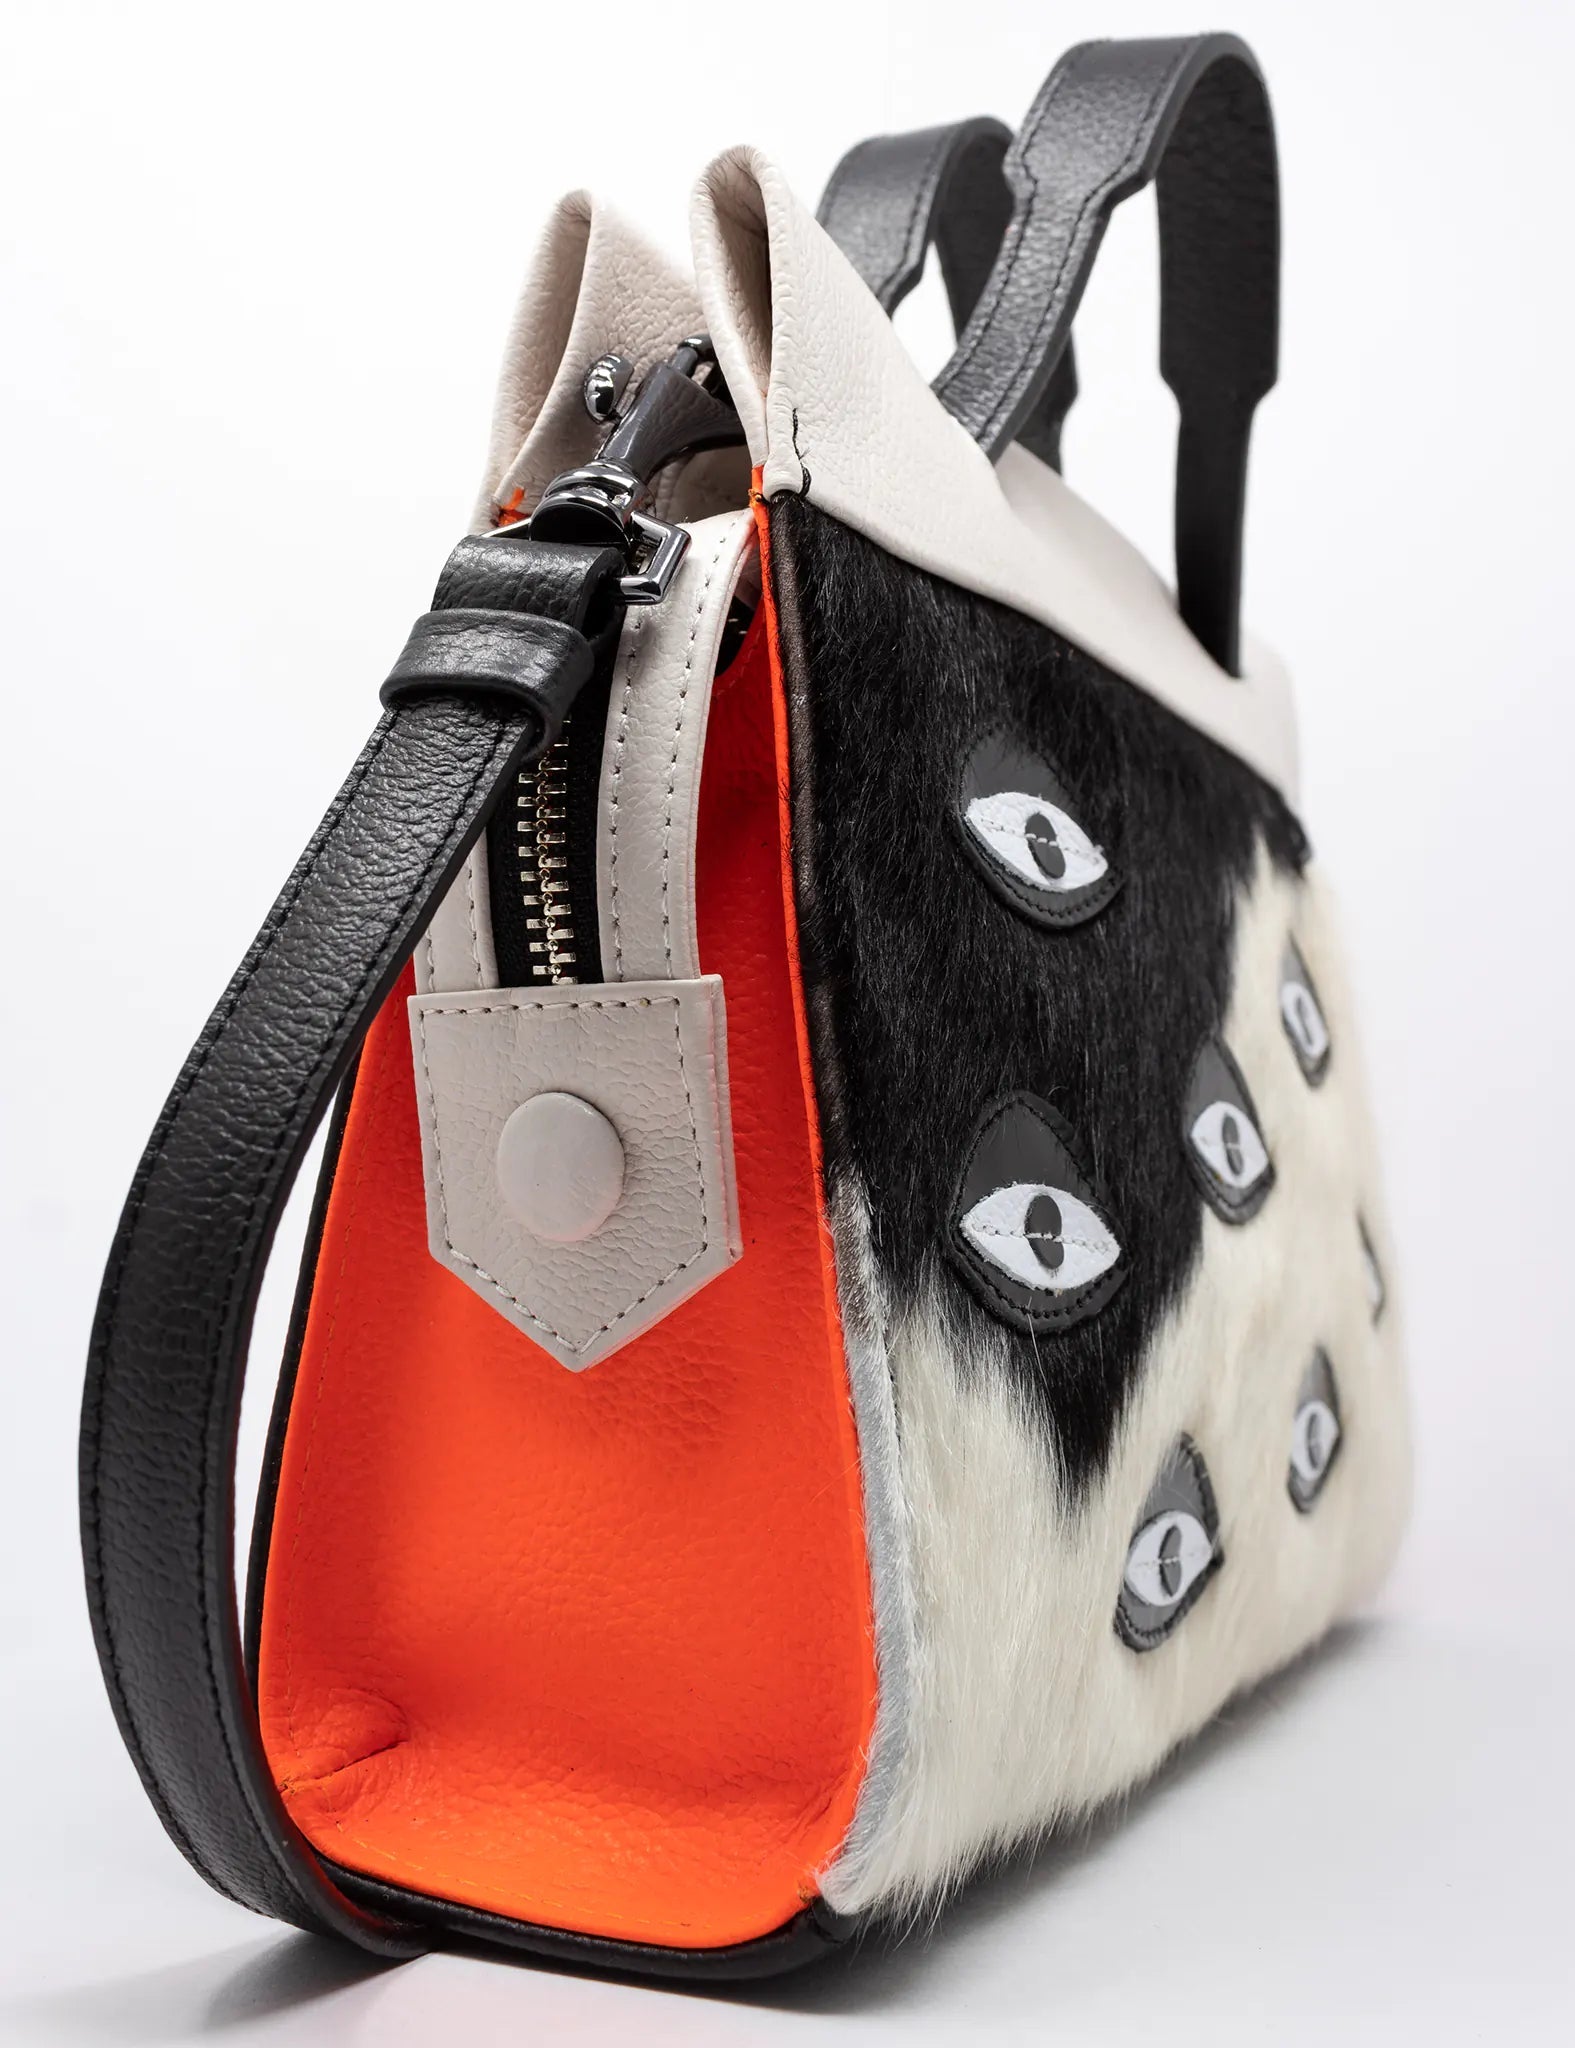 Vali Crossbody Small Black And Neon Orange Leather Bag - Eyes Applique Adjustable Handle - Side view